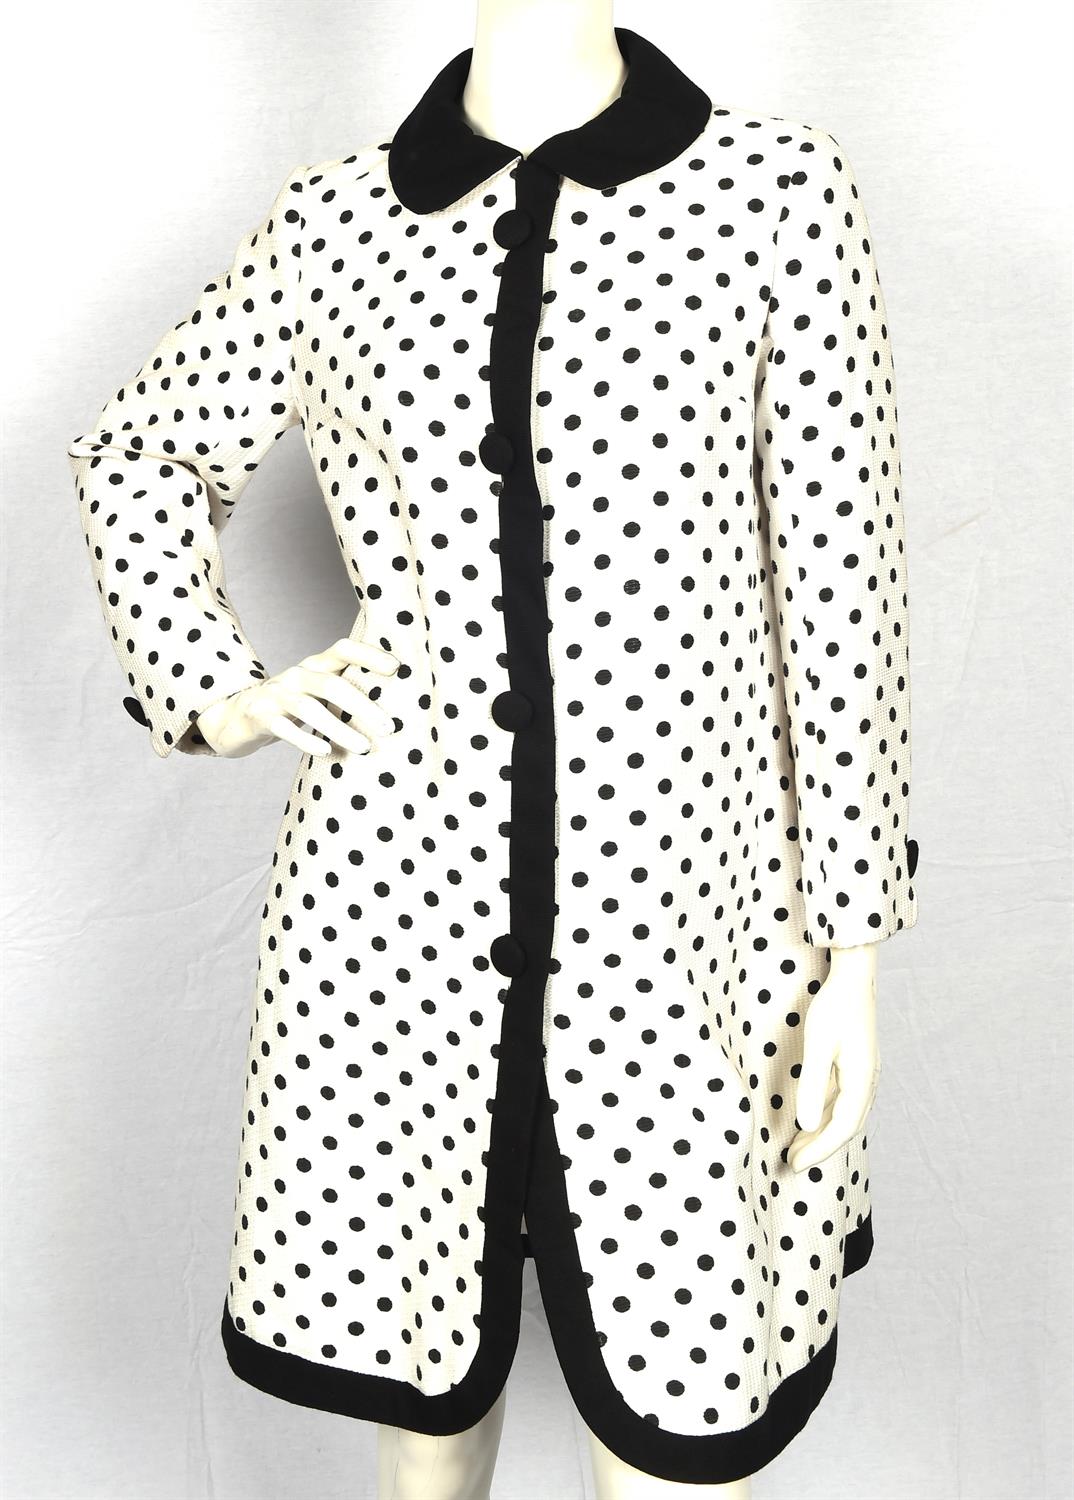 CHRISTIAN DIOR "DIORLING" 1960s silk and wool duster-coat with black polka-dots. Fully lined with